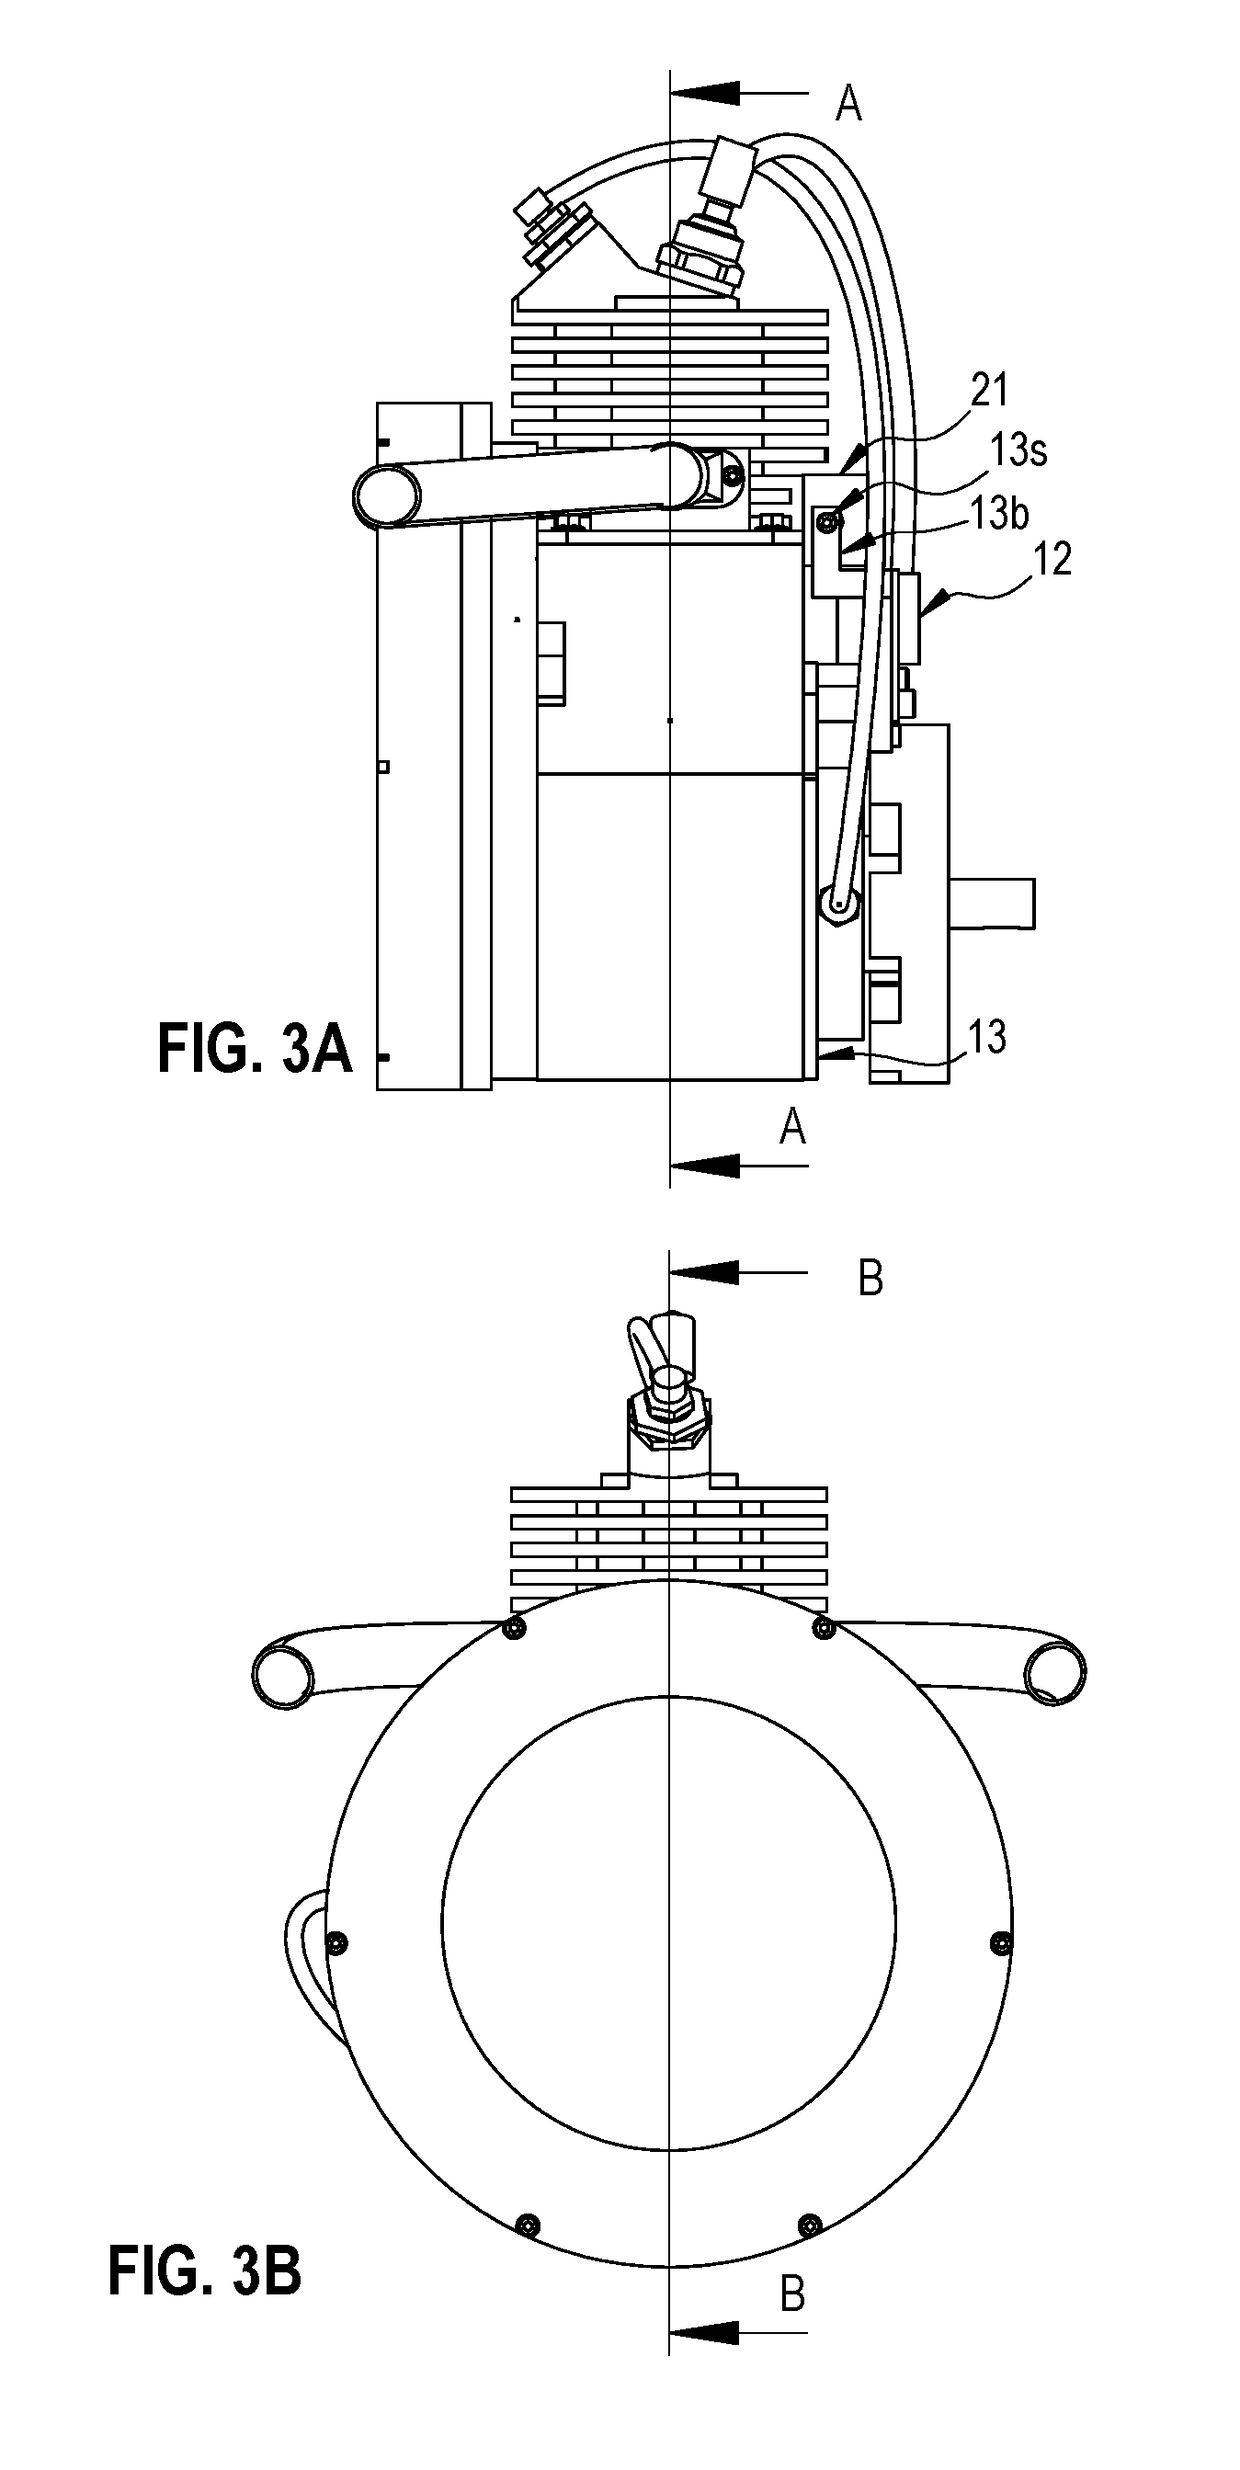 Two-stroke internal combustion engine with crankcase lubrication system